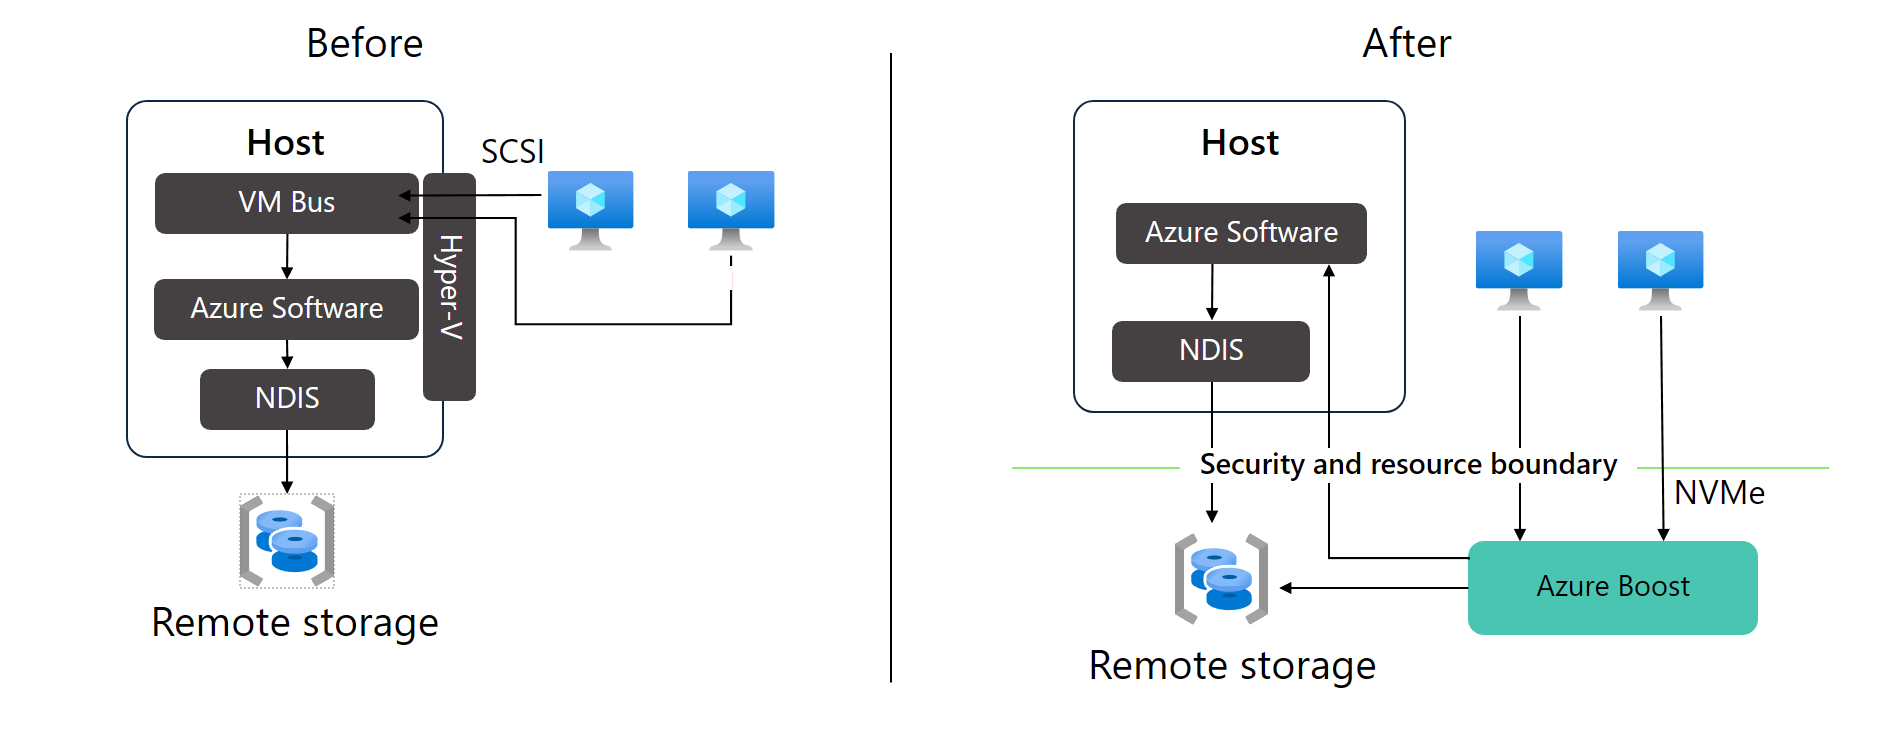 Diagram showing the difference between managed SCSI storage and Azure Boost's managed NVMe storage.